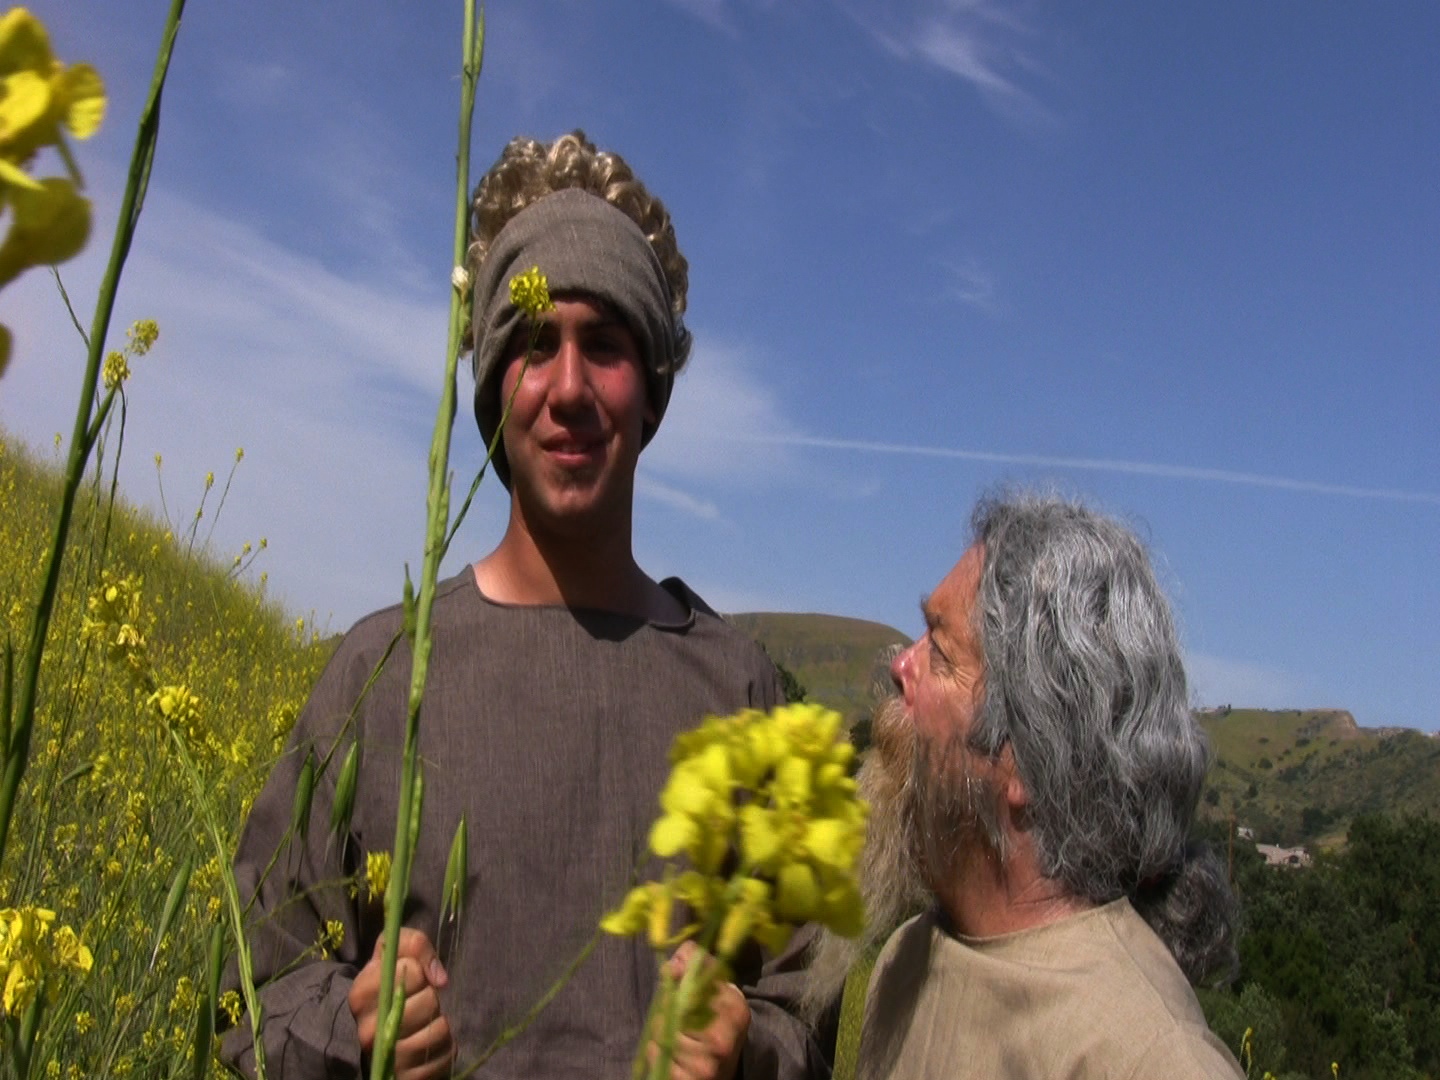 Scott MacLachlan and John Armstrong as Abraham and Isaac in Pirromount's 2009 comedy "The God Complex."